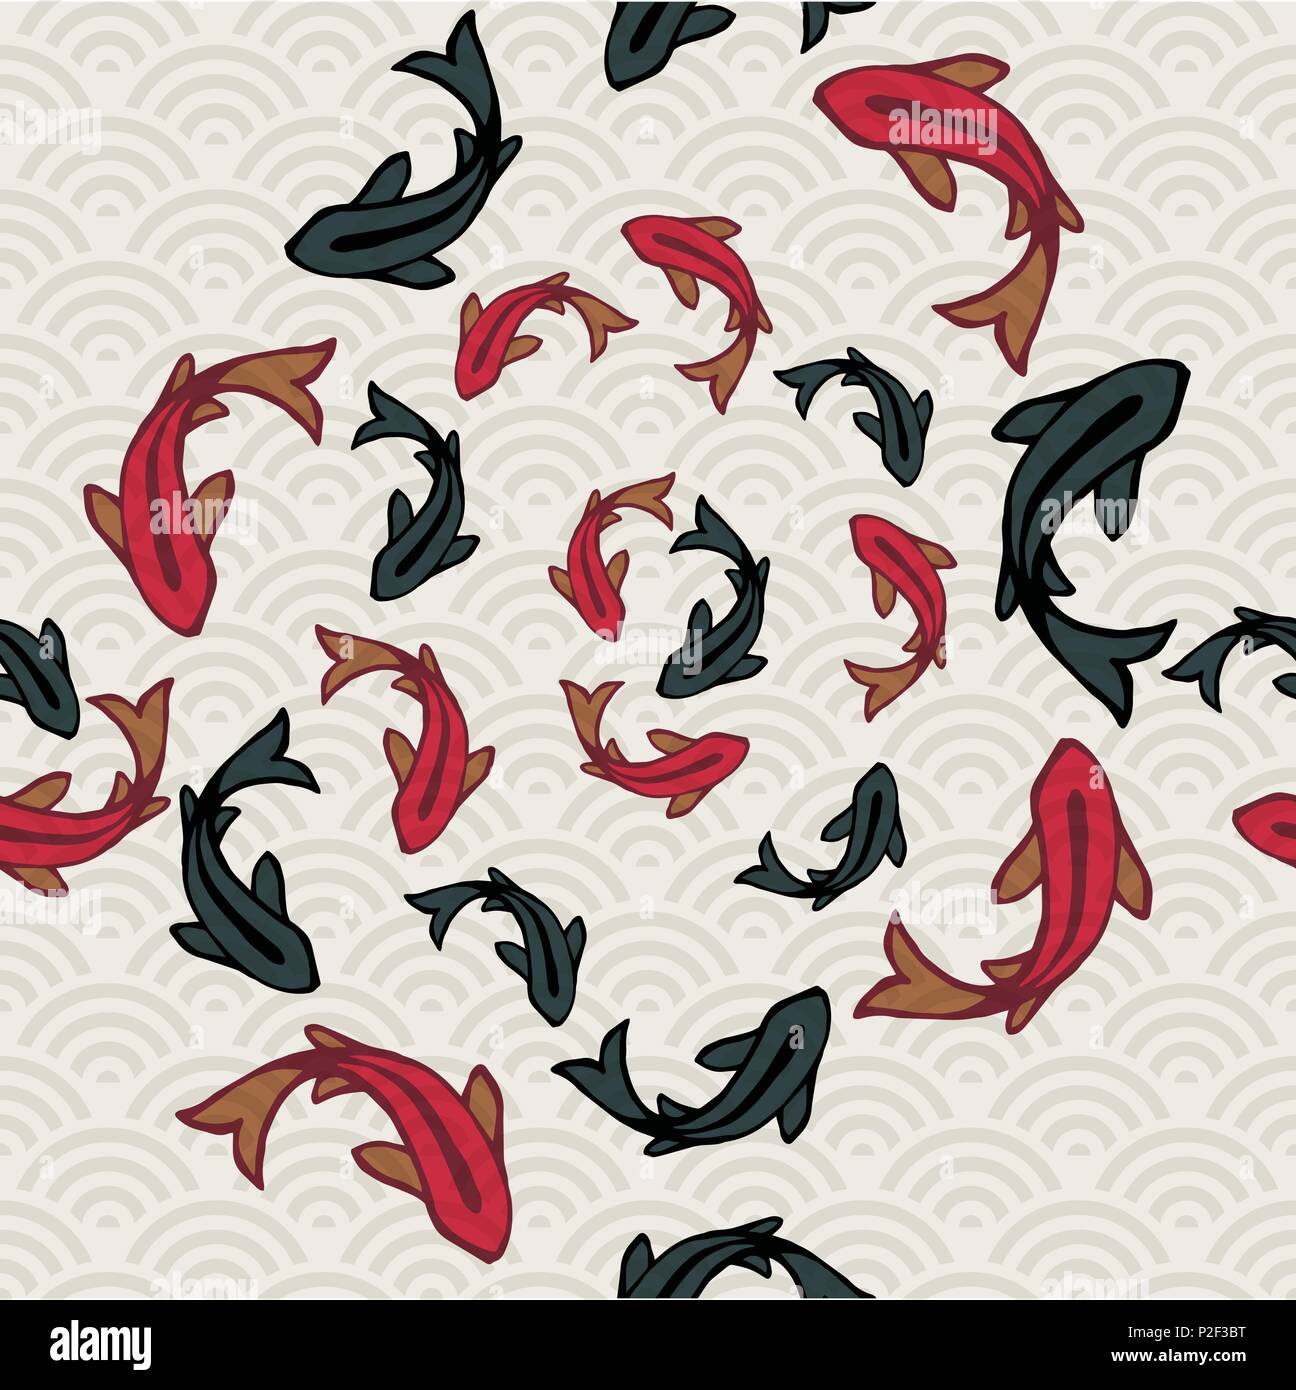 Koi fish seamless pattern, traditional asian style art of carp goldfish swimming in pond. Hand drawn illustration background. EPS10 vector. Stock Vector